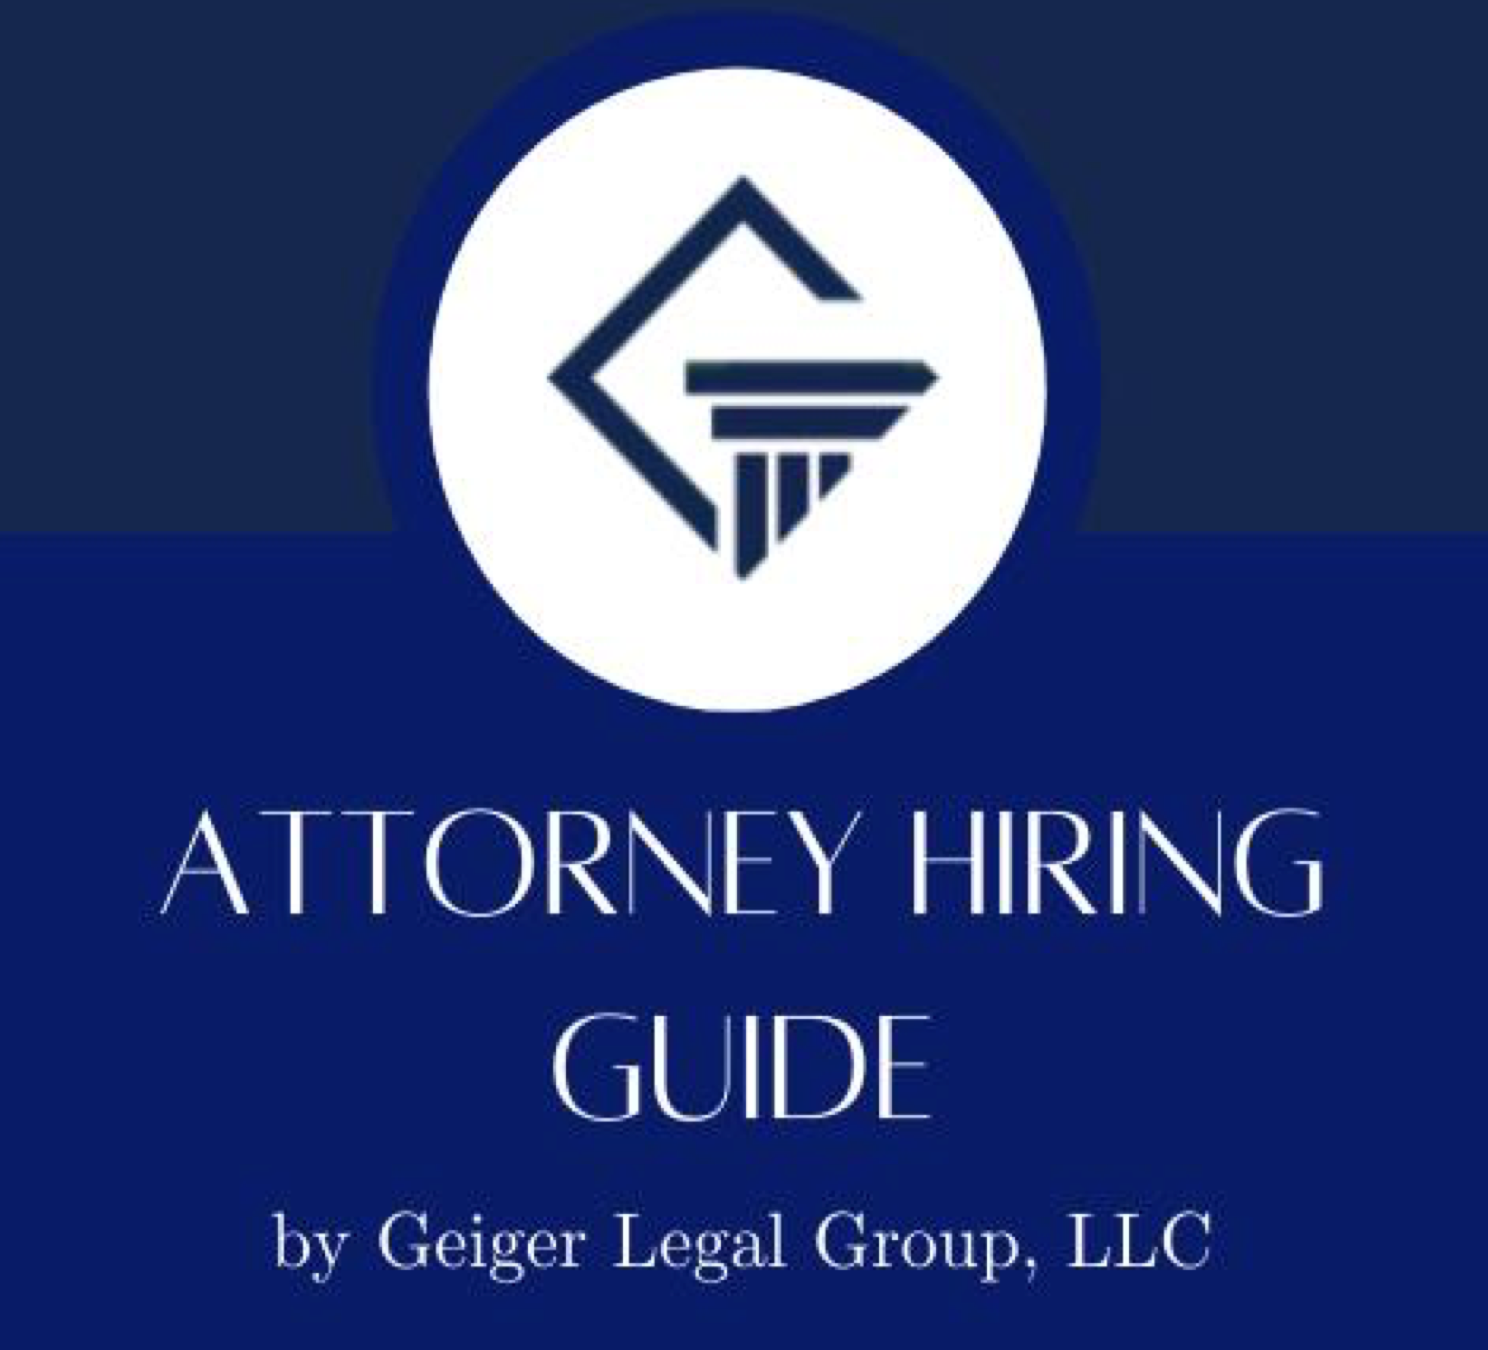 Attorney Hiring Guide title page, courtesy of Geiger Law Group, LLC.